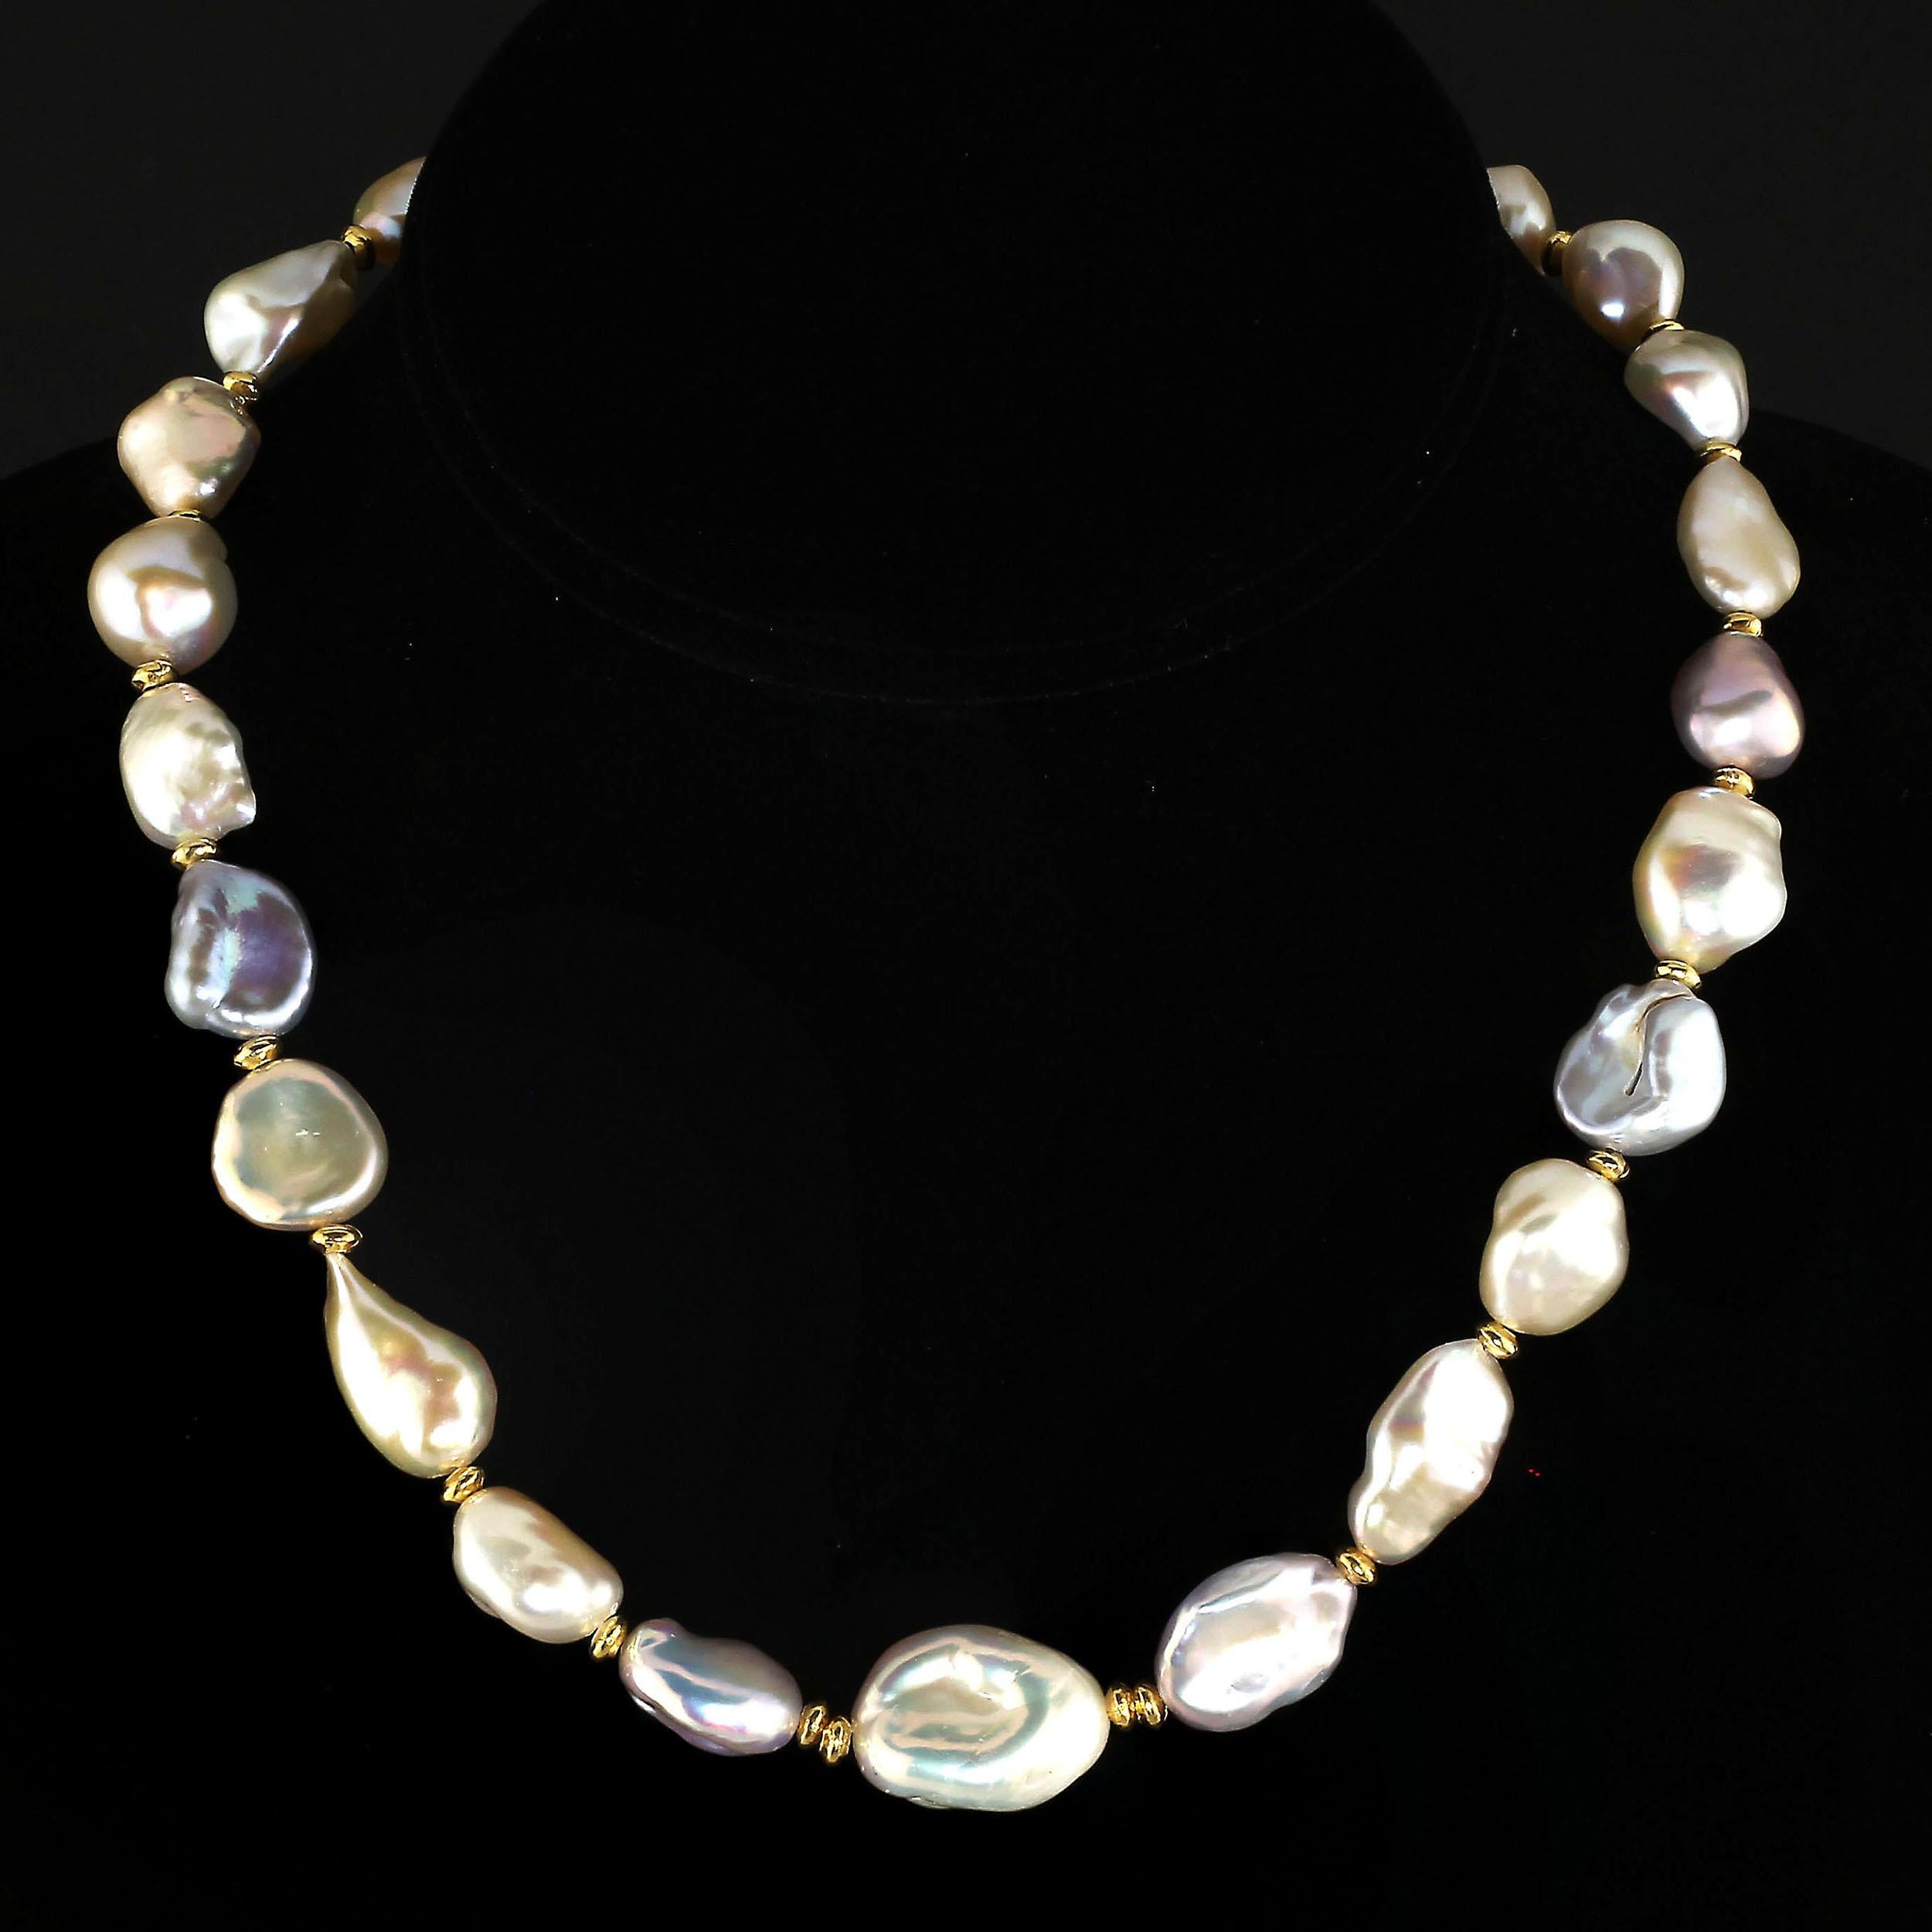 The Pearl is the Queen of Gems and the gem of Queens

Wear your Pearls, when you left your tiara in the safe!

One of a kind, Chinese Freshwater Pearl choker necklace from a second harvest of the mollusk. These gorgeous Pearls glow, they shimmer,